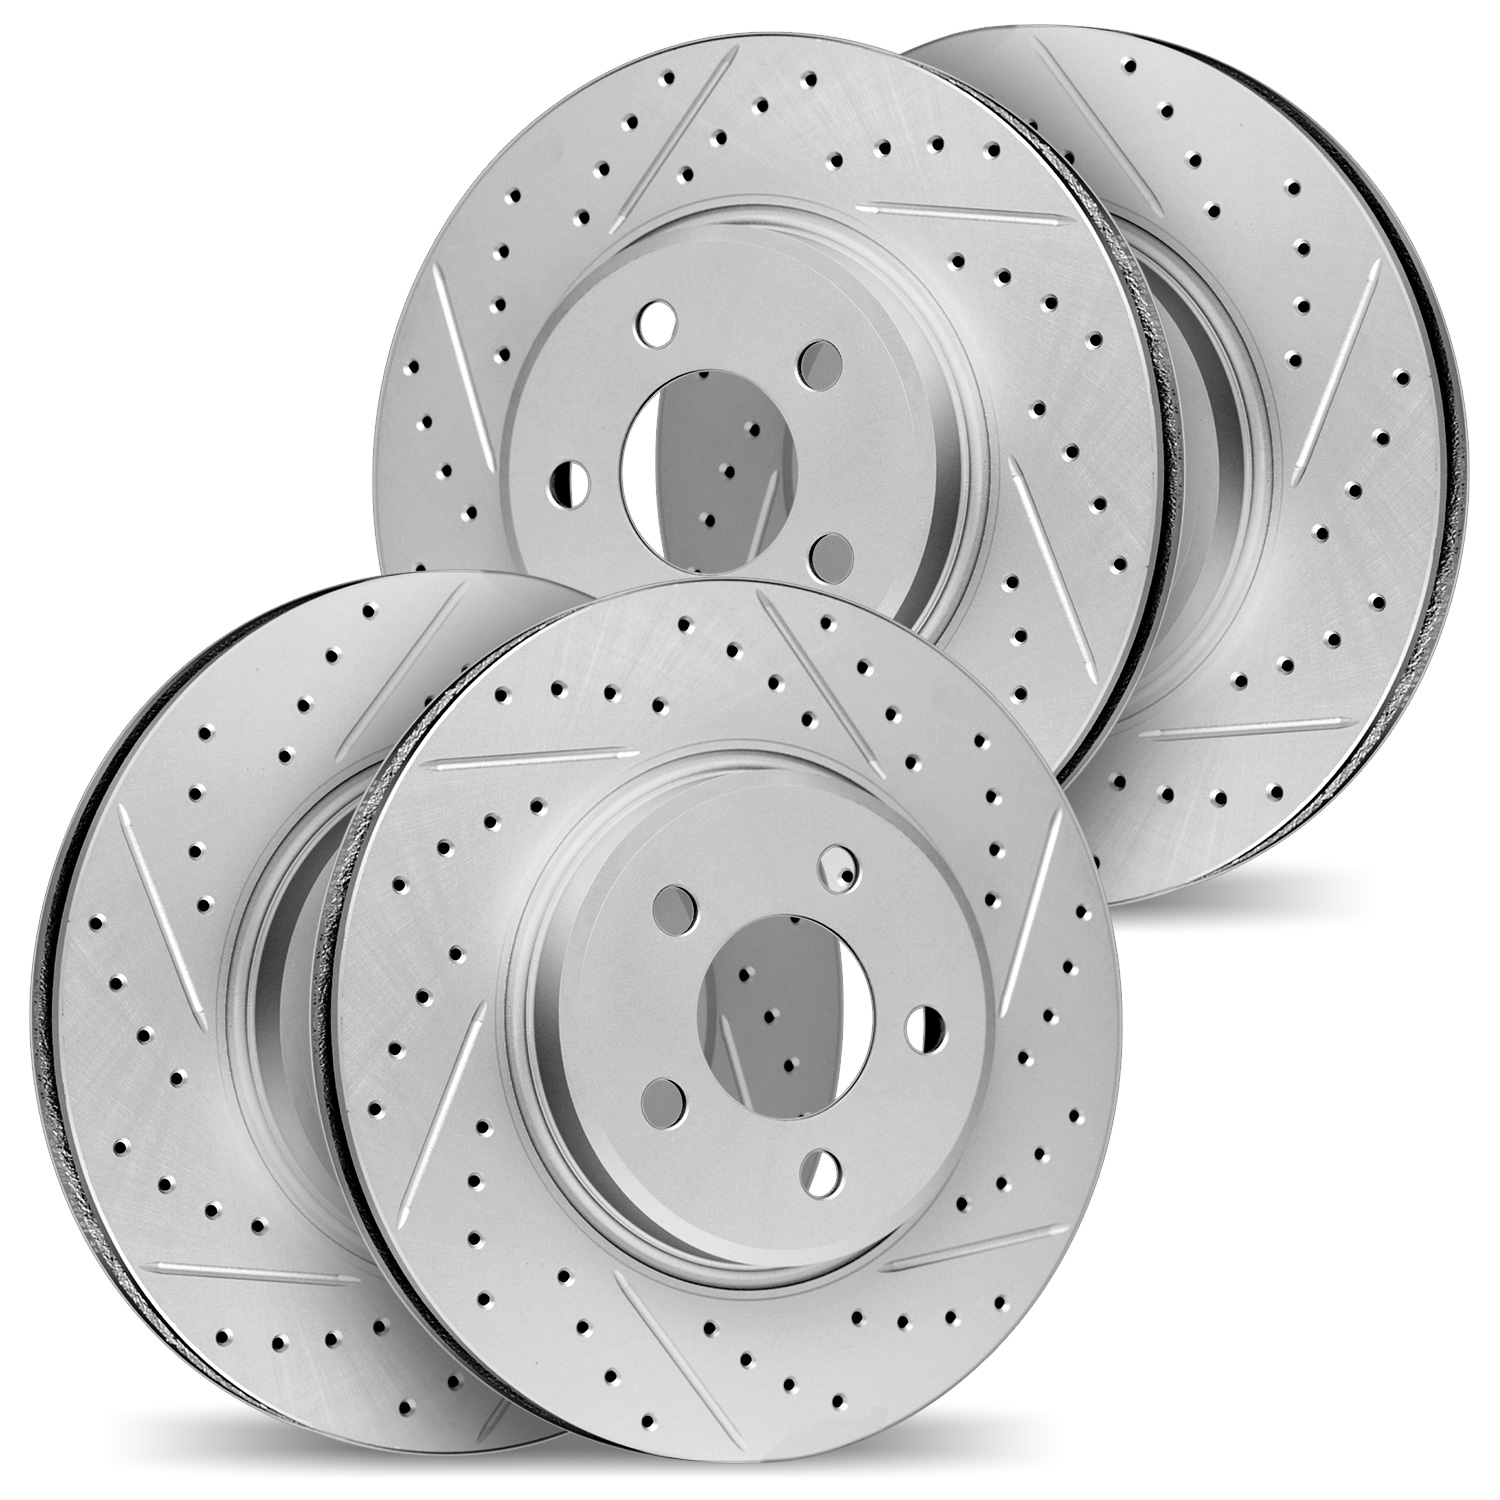 2004-67059 Geoperformance Drilled/Slotted Brake Rotors, 2008-2015 Infiniti/Nissan, Position: Front and Rear